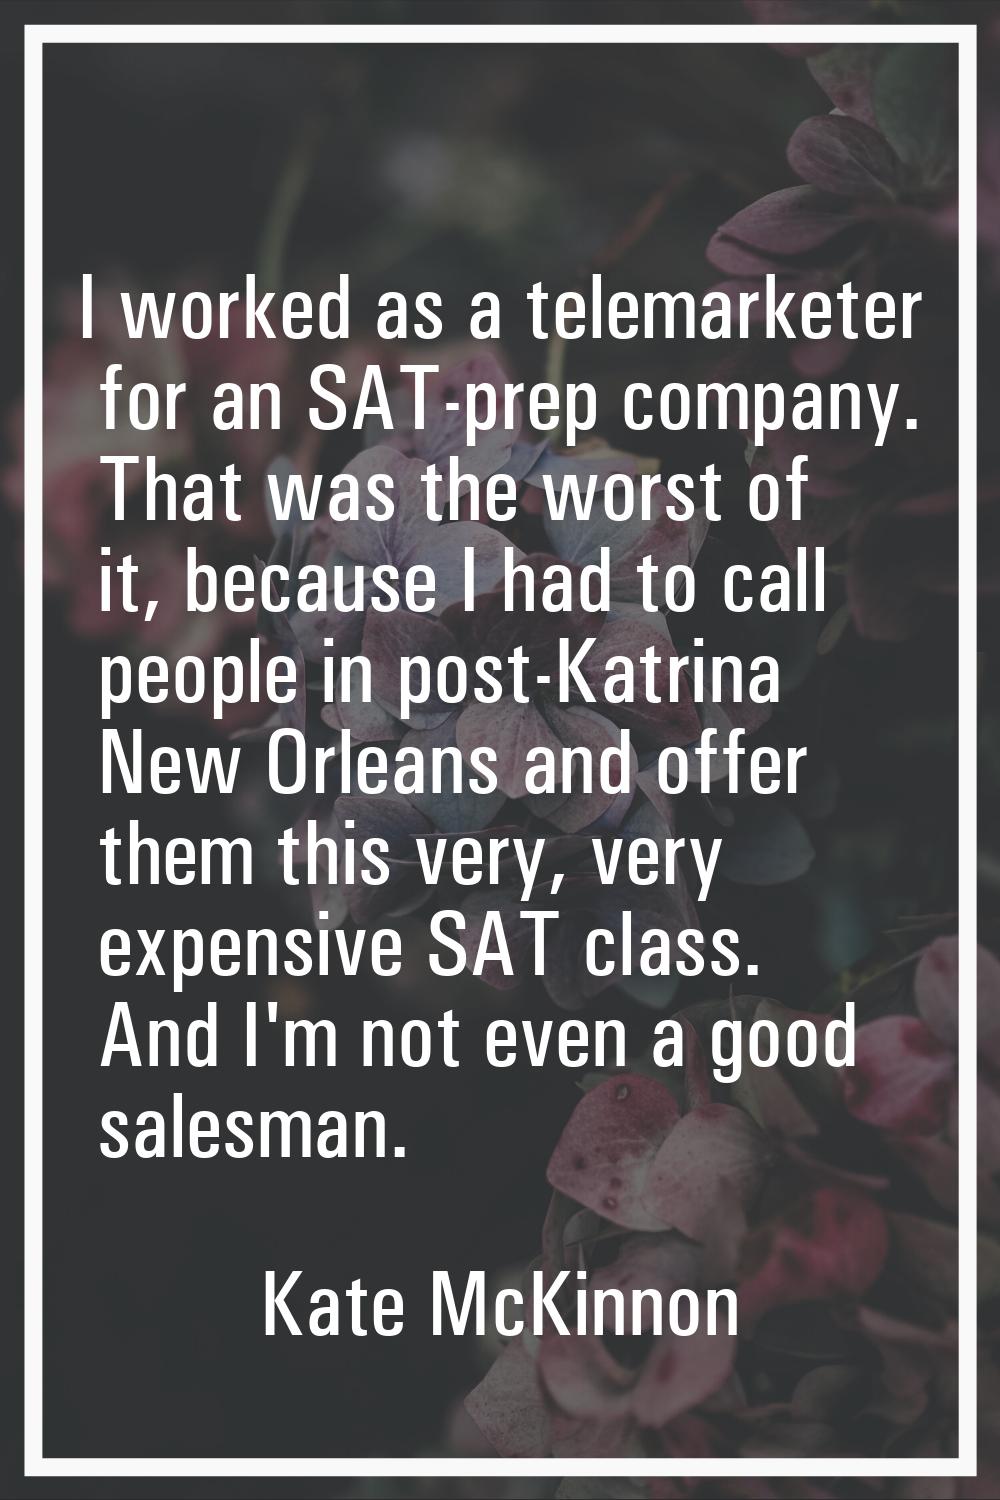 I worked as a telemarketer for an SAT-prep company. That was the worst of it, because I had to call